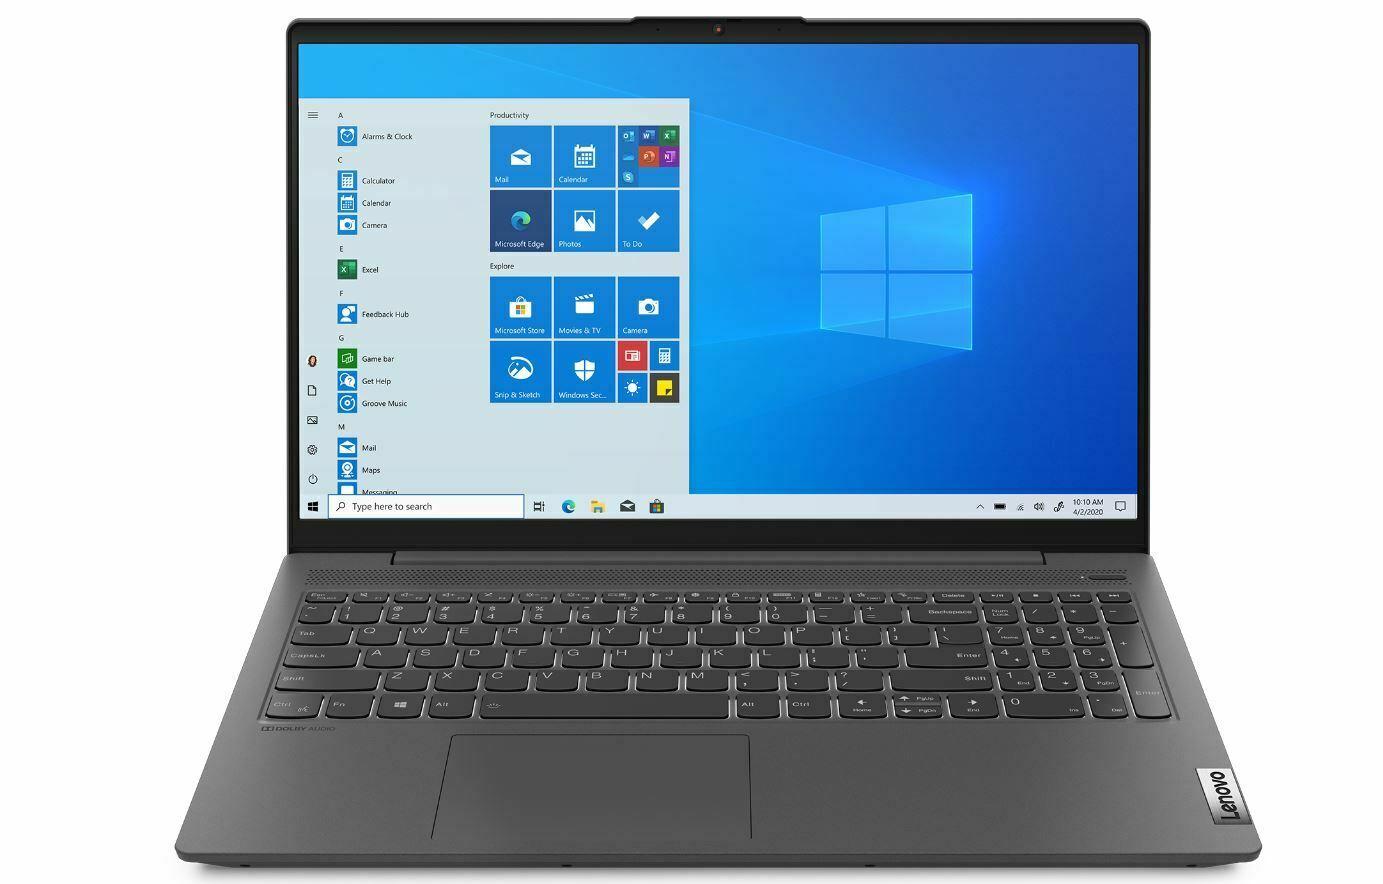 Lenovo IdeaPad 5 15.6in i5 16GB Touchscreen Laptop for $599 Shipped